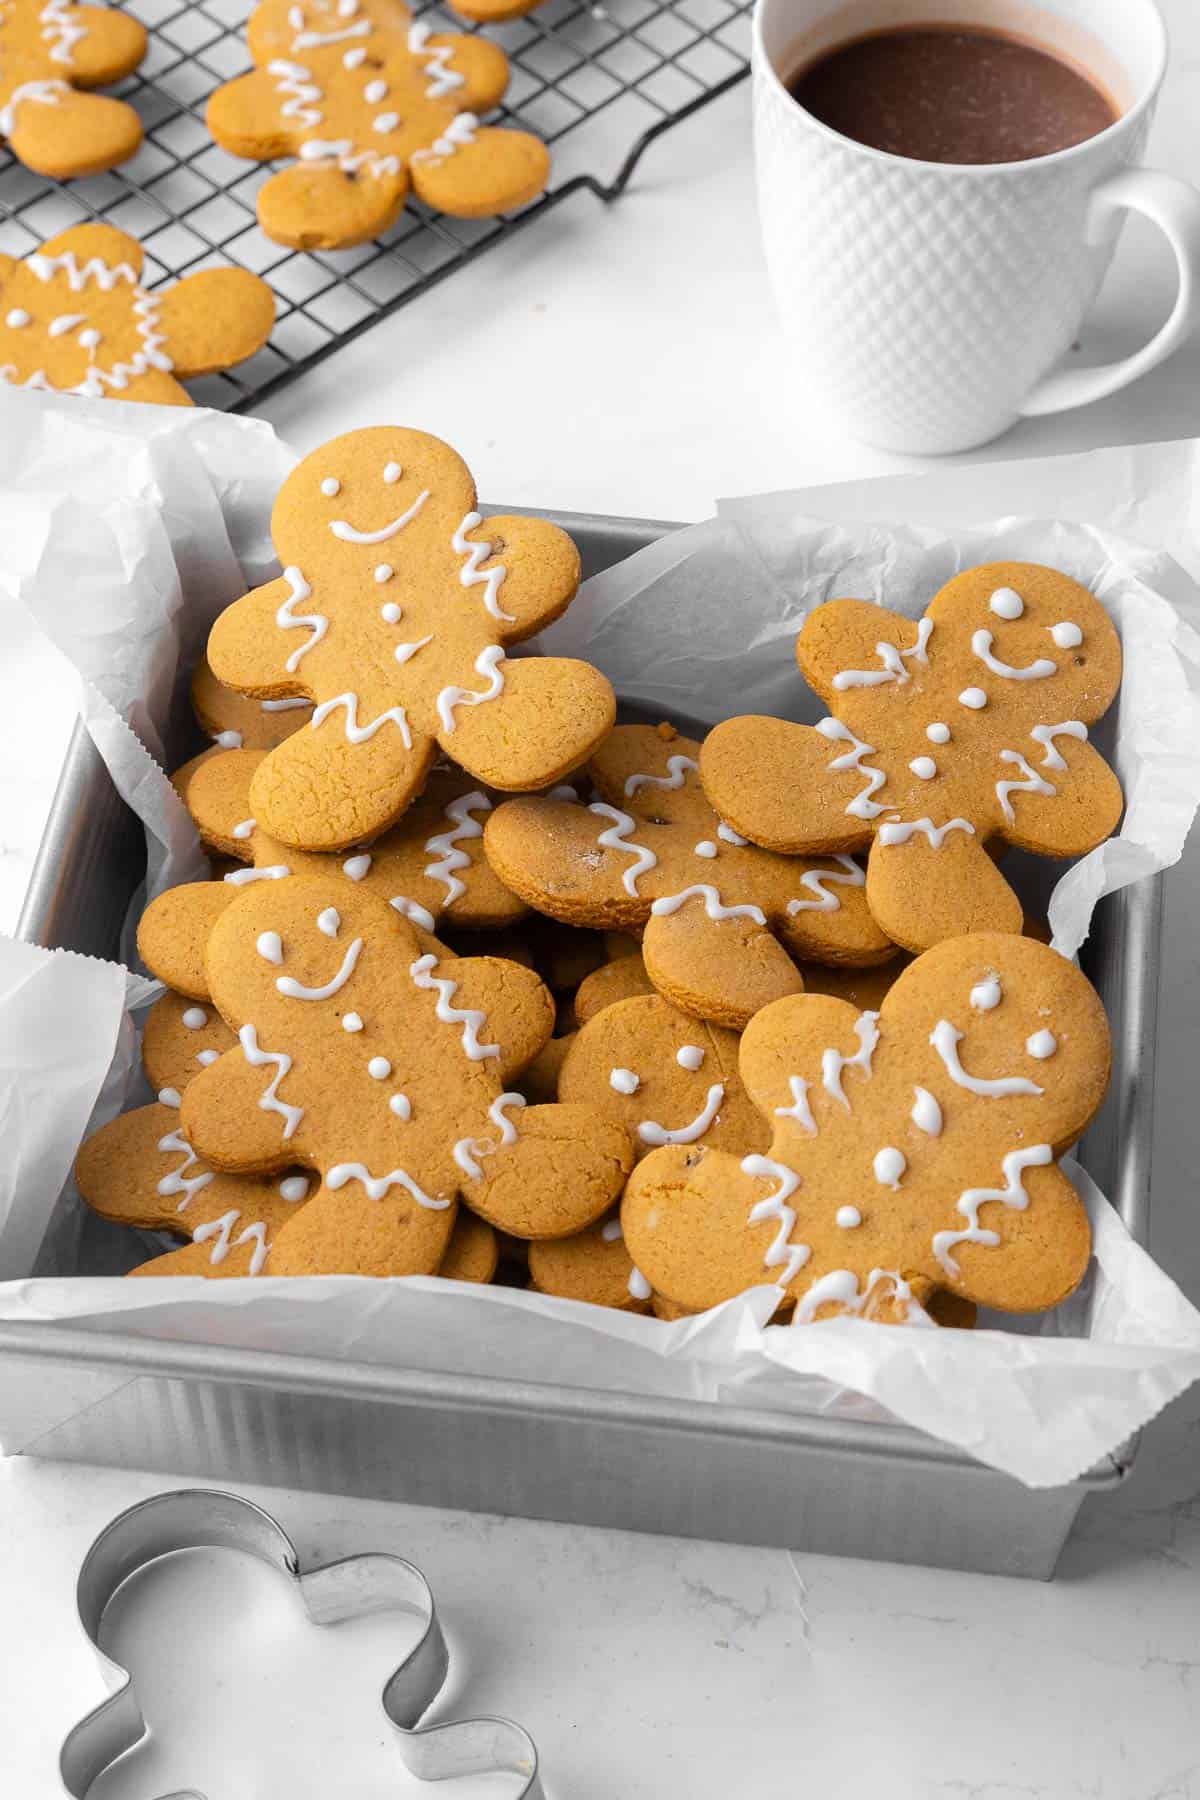 Gingerbread cookies in a a parchment lined square tin decorated with icing. Gingerbread man cookie cutter nearby and a wire rack with more cookies and a cup of coffee, too.